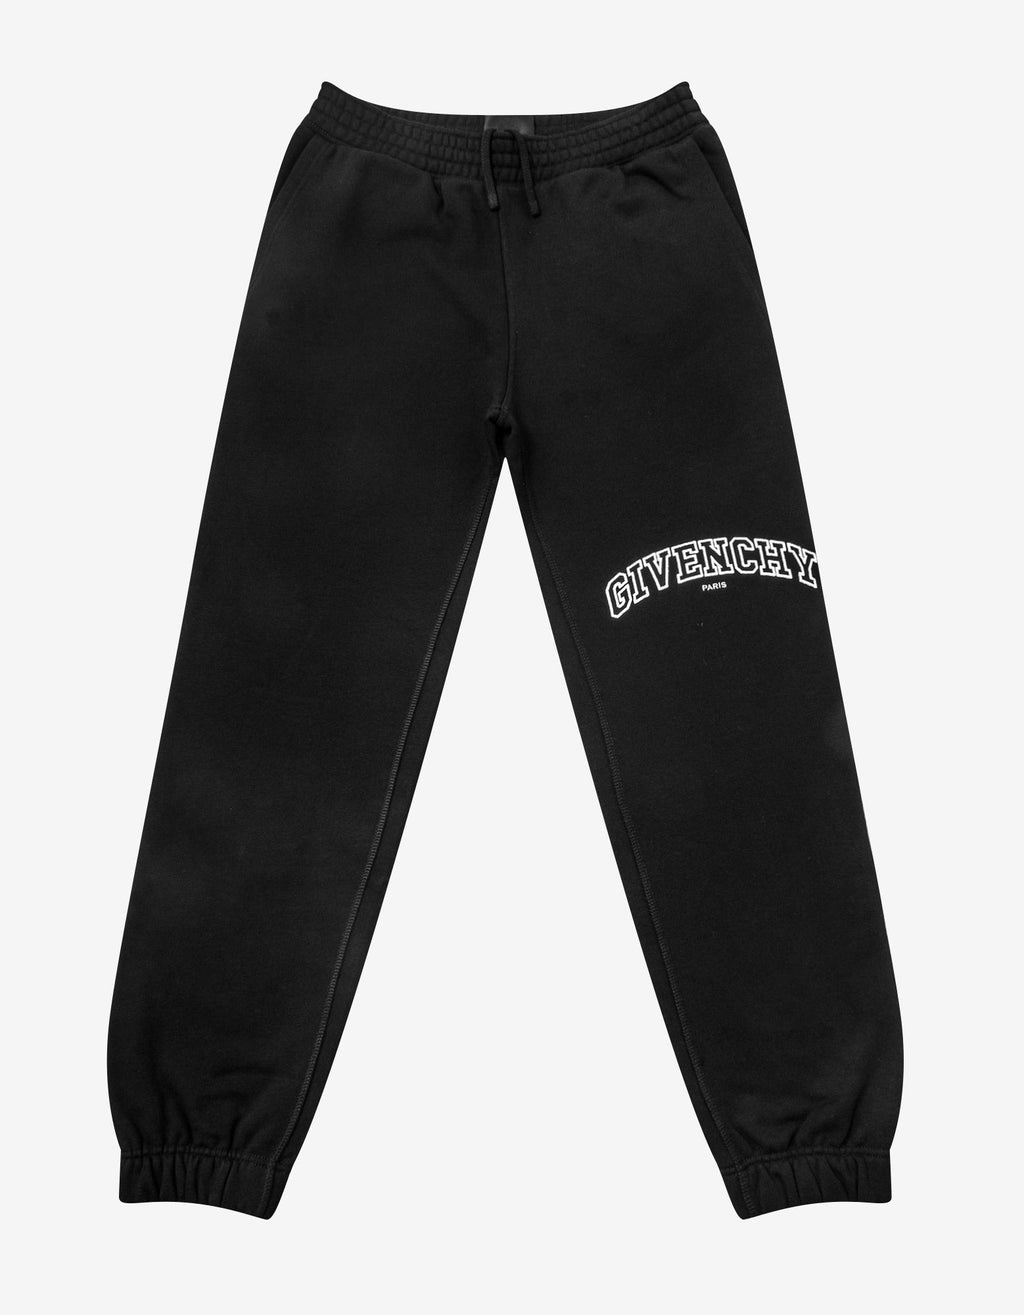 Givenchy Givenchy Black Embroidered College Logo Sweat Pants